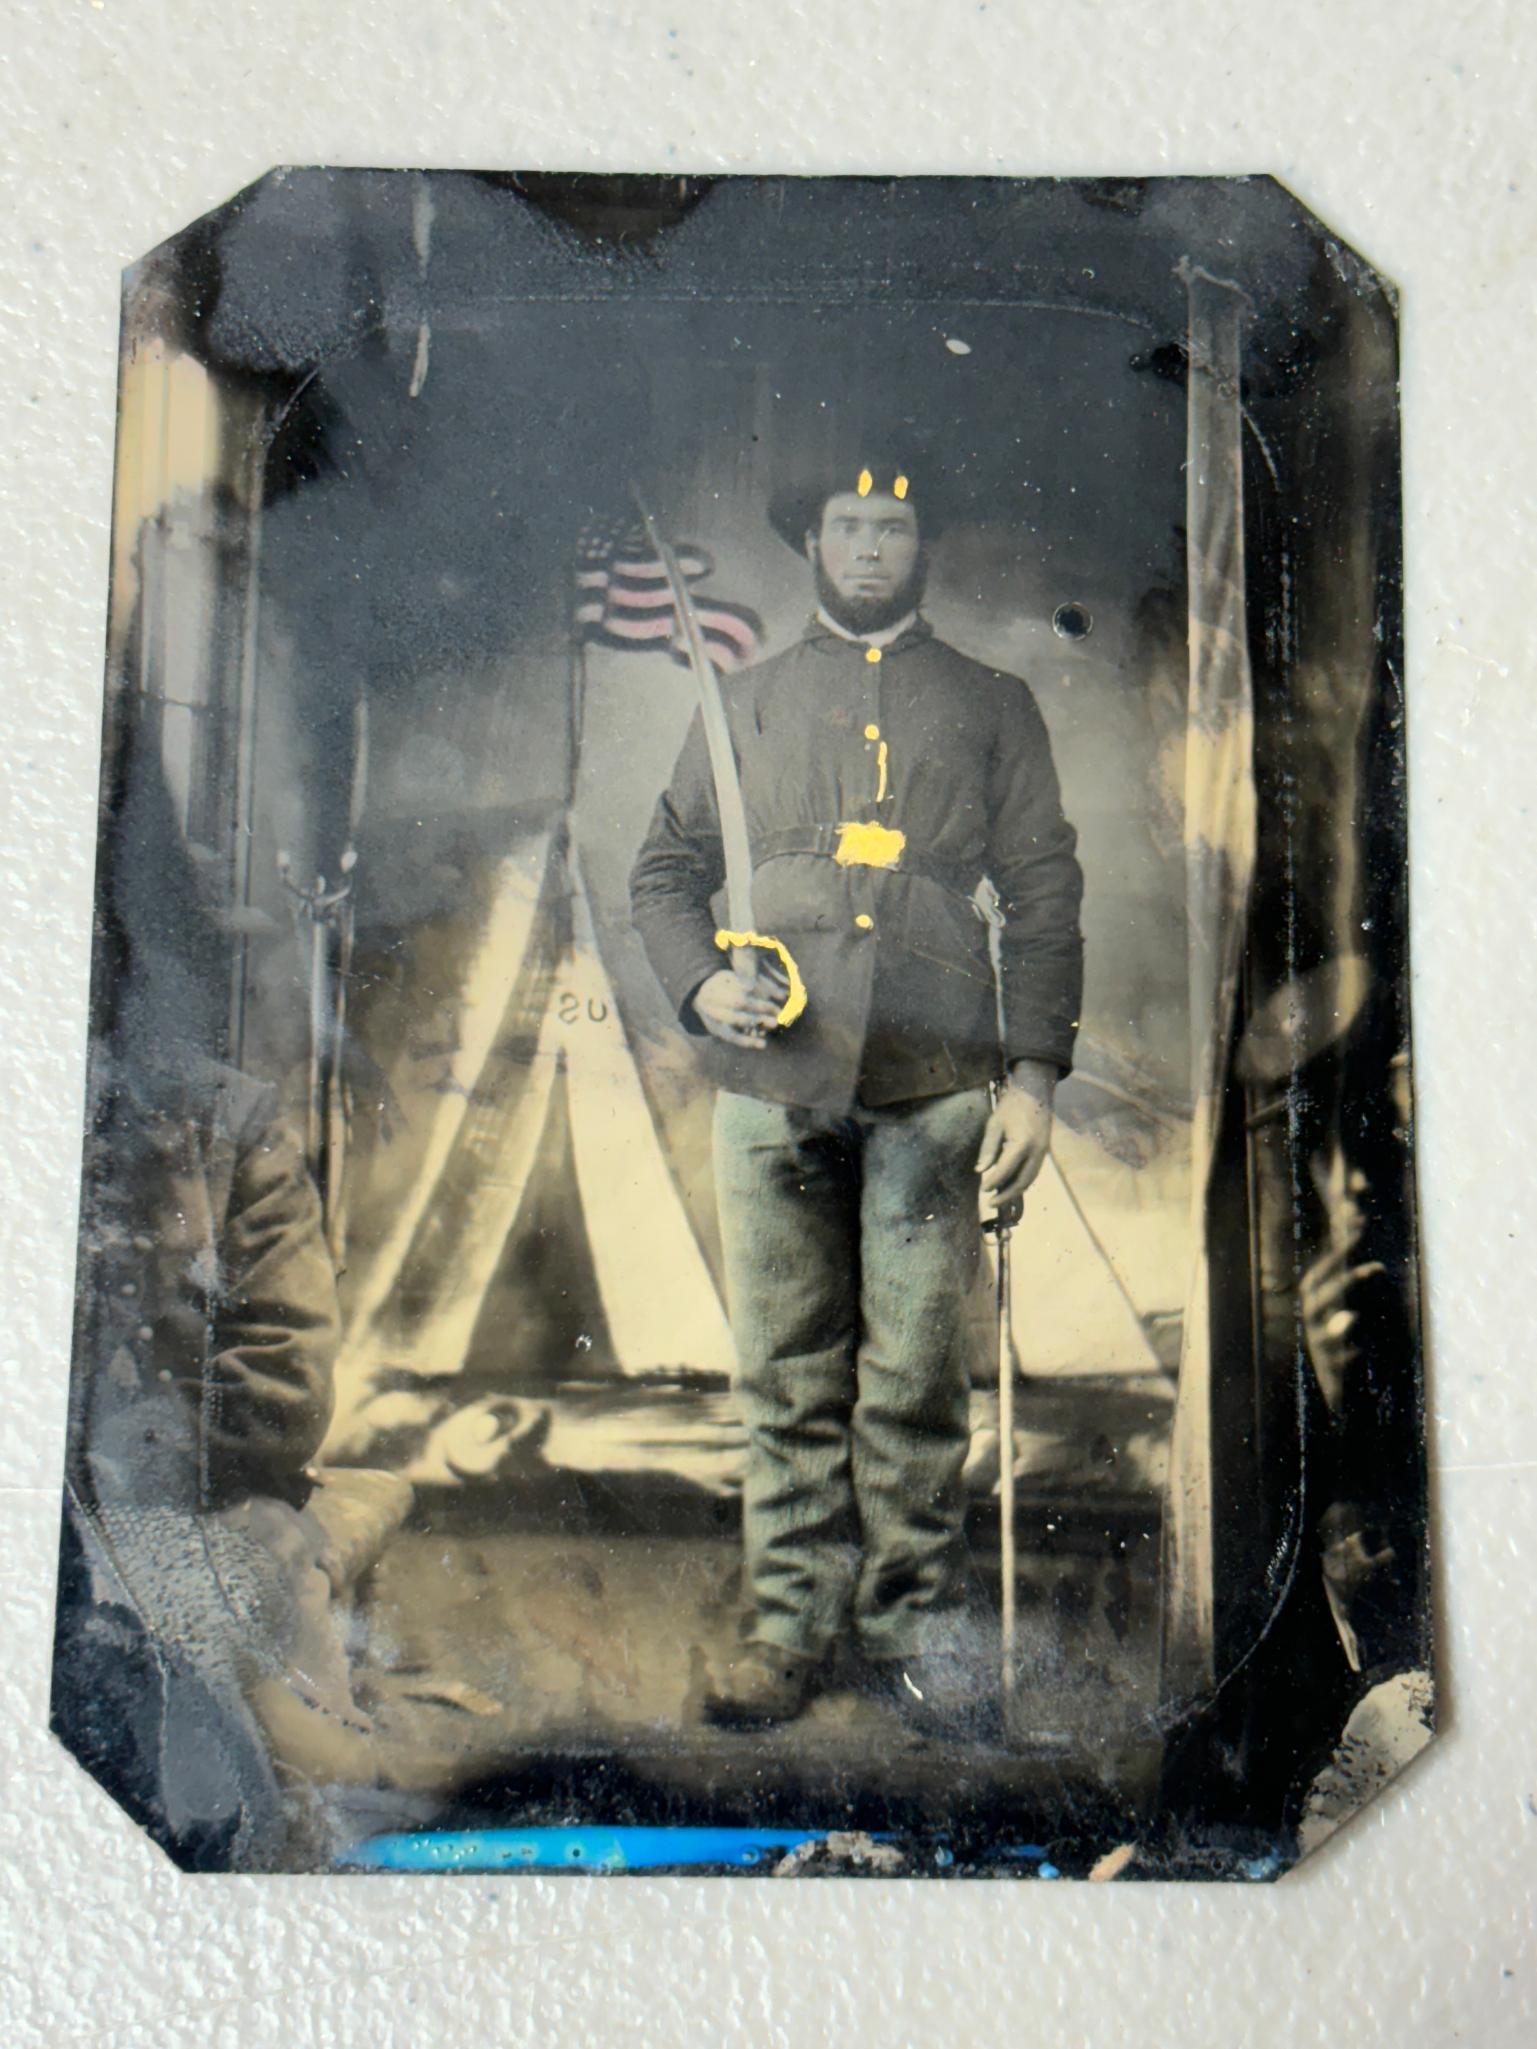 CIVIL WAR SOLDIER TINTYPE -OTHER SOLDIERS WAITING TO HAVE THEIR PHOTOGRAPHS TAKEN